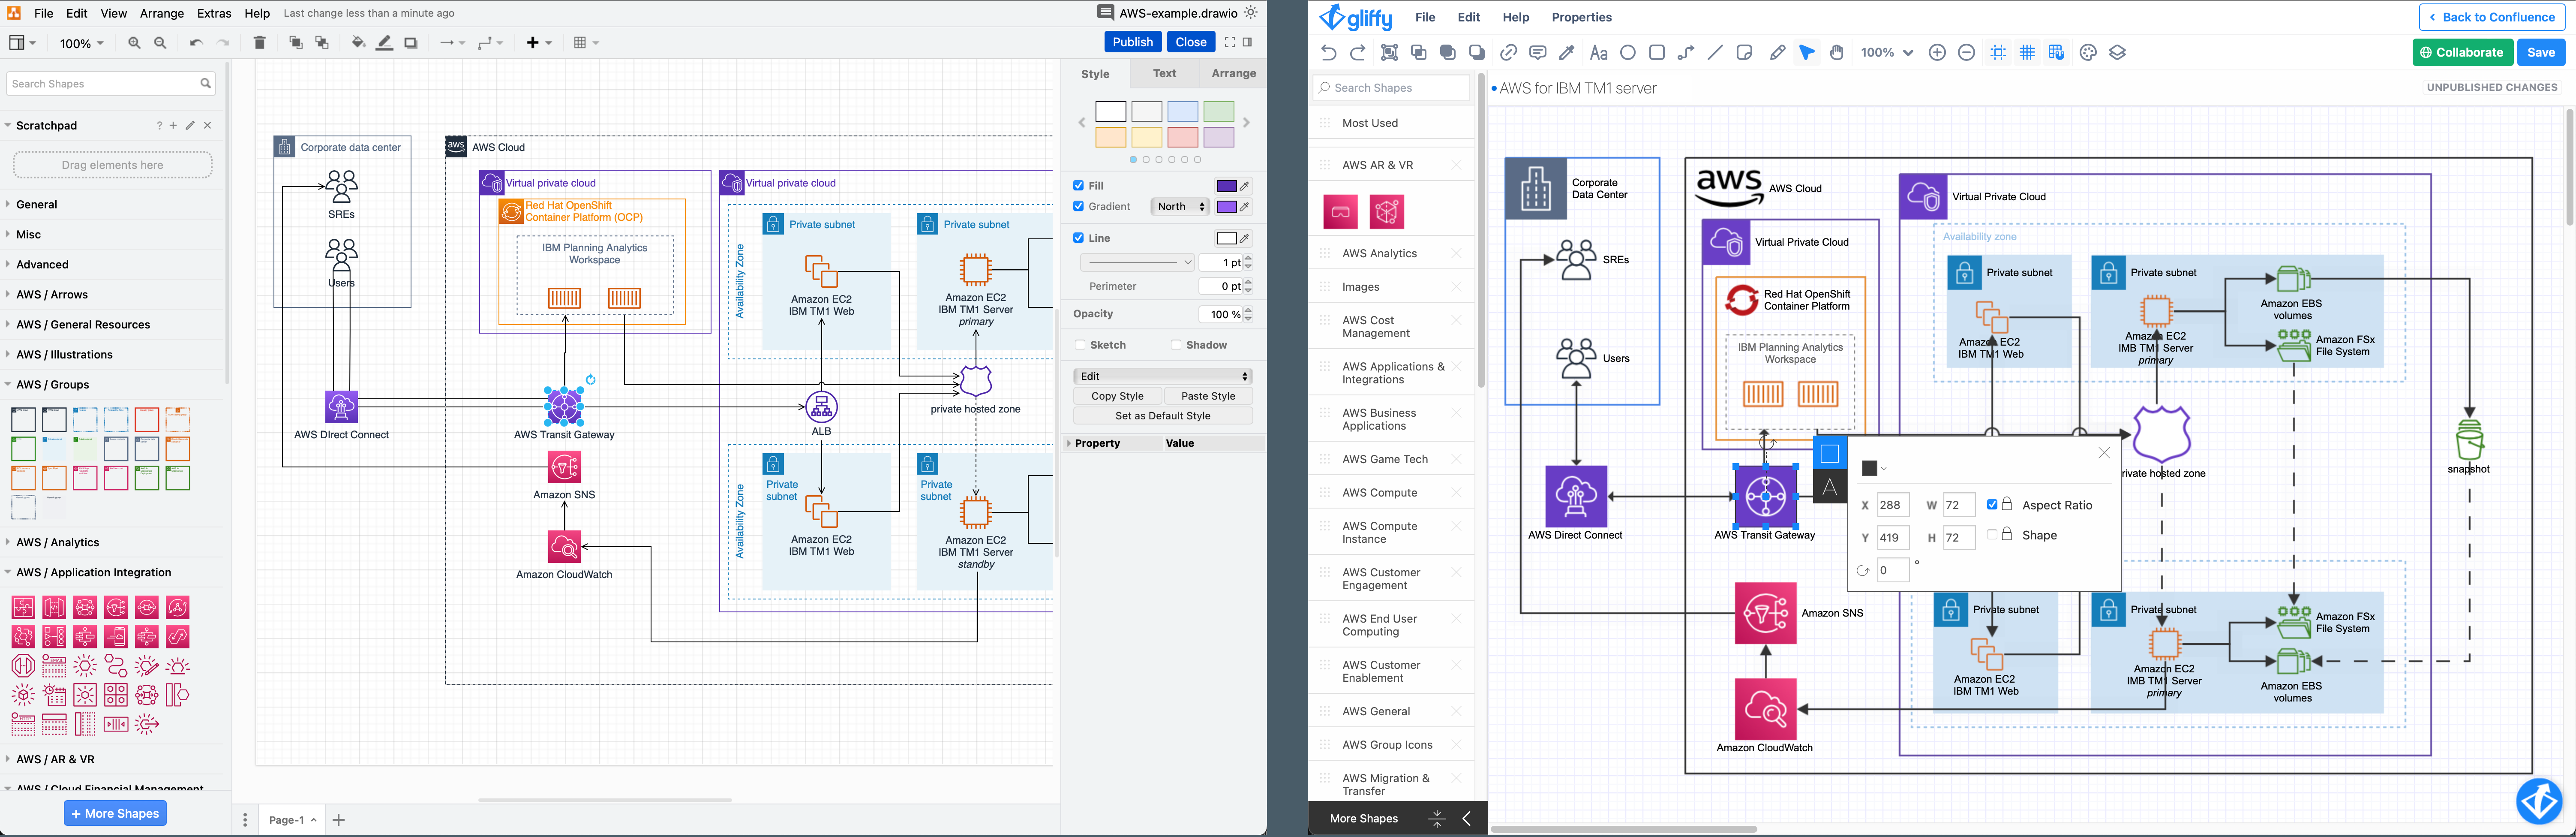 There are many differences between the Gliffy and draw.io diagram editors for Confluence